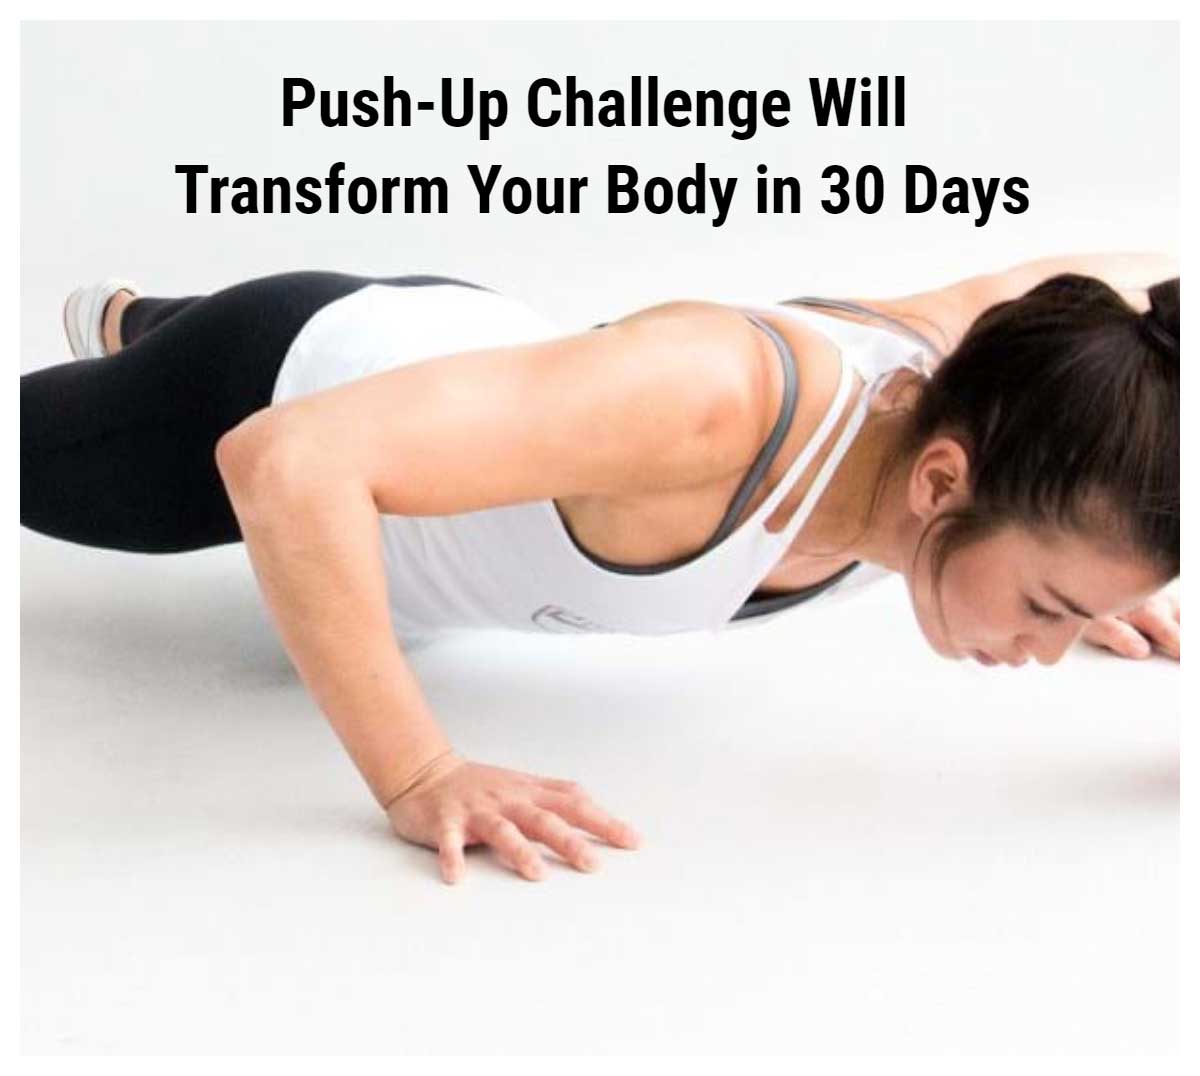 Push-Up Challenge Will Transform Your Body in 30 Days